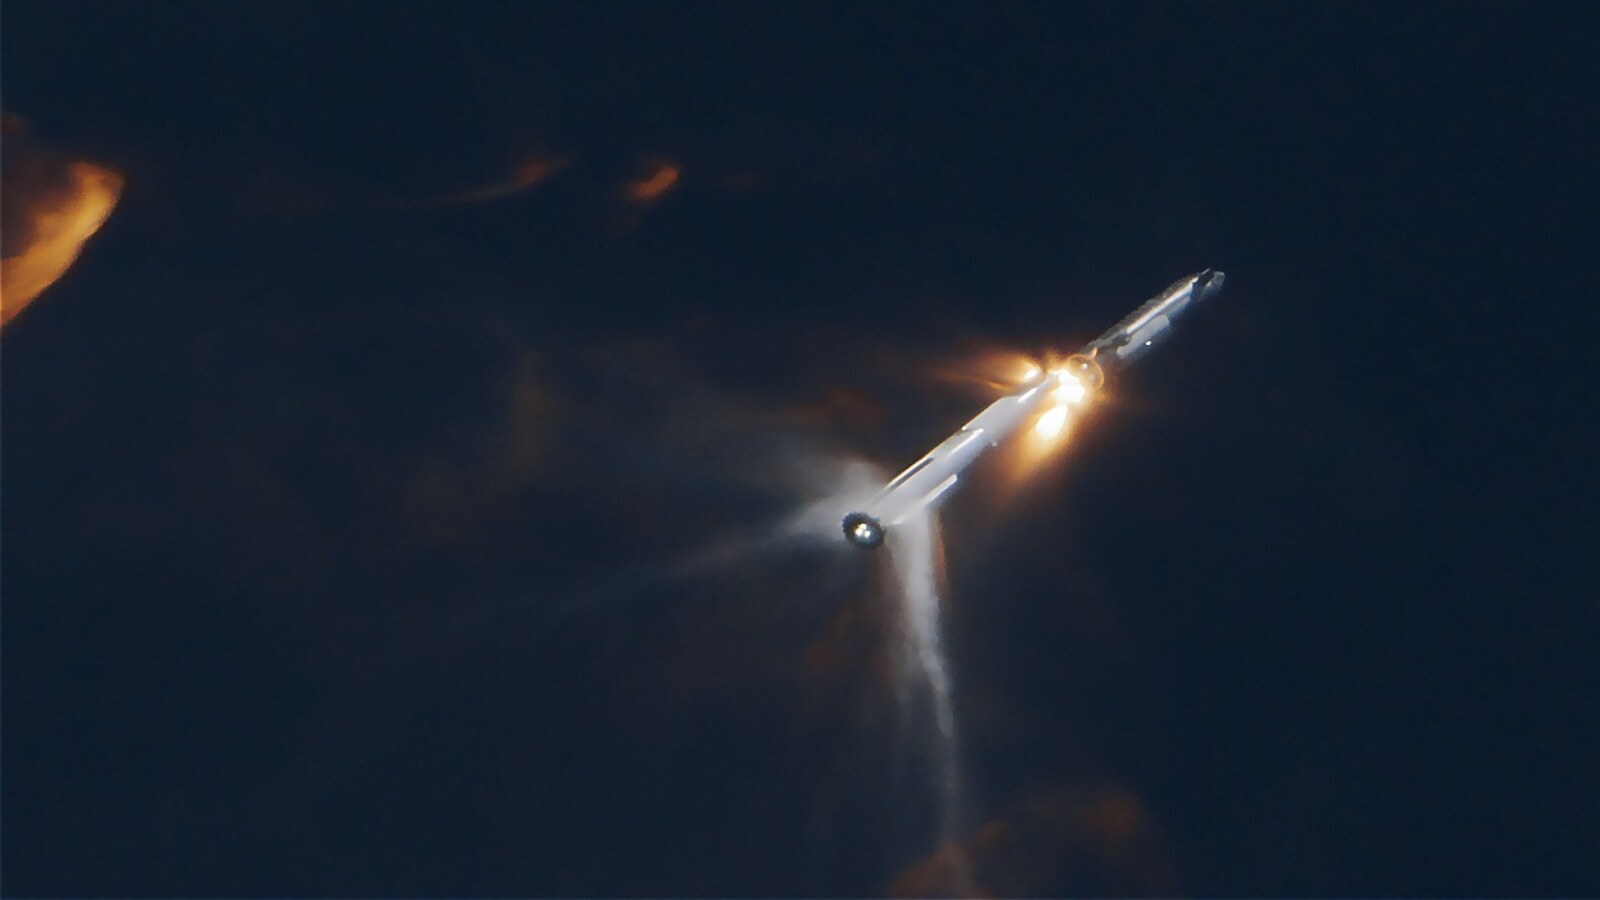 Video Shows SpaceX Starship Prepping for Second Launch After Explosion